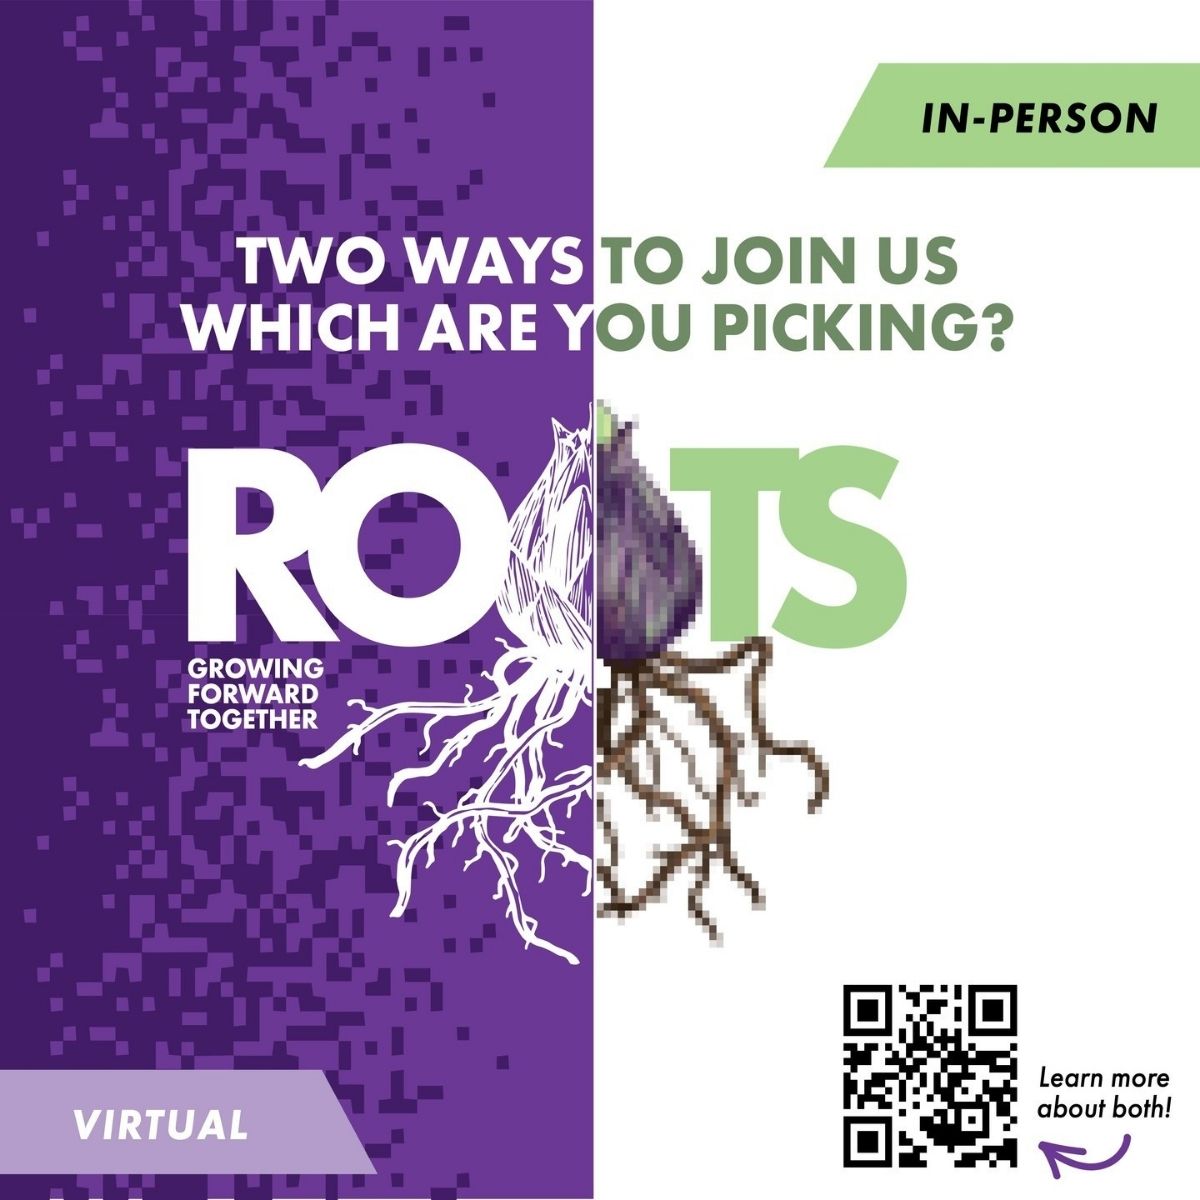 Virtual or In-person at Roots, AIFD Symposium Las Vegas - on Thursd